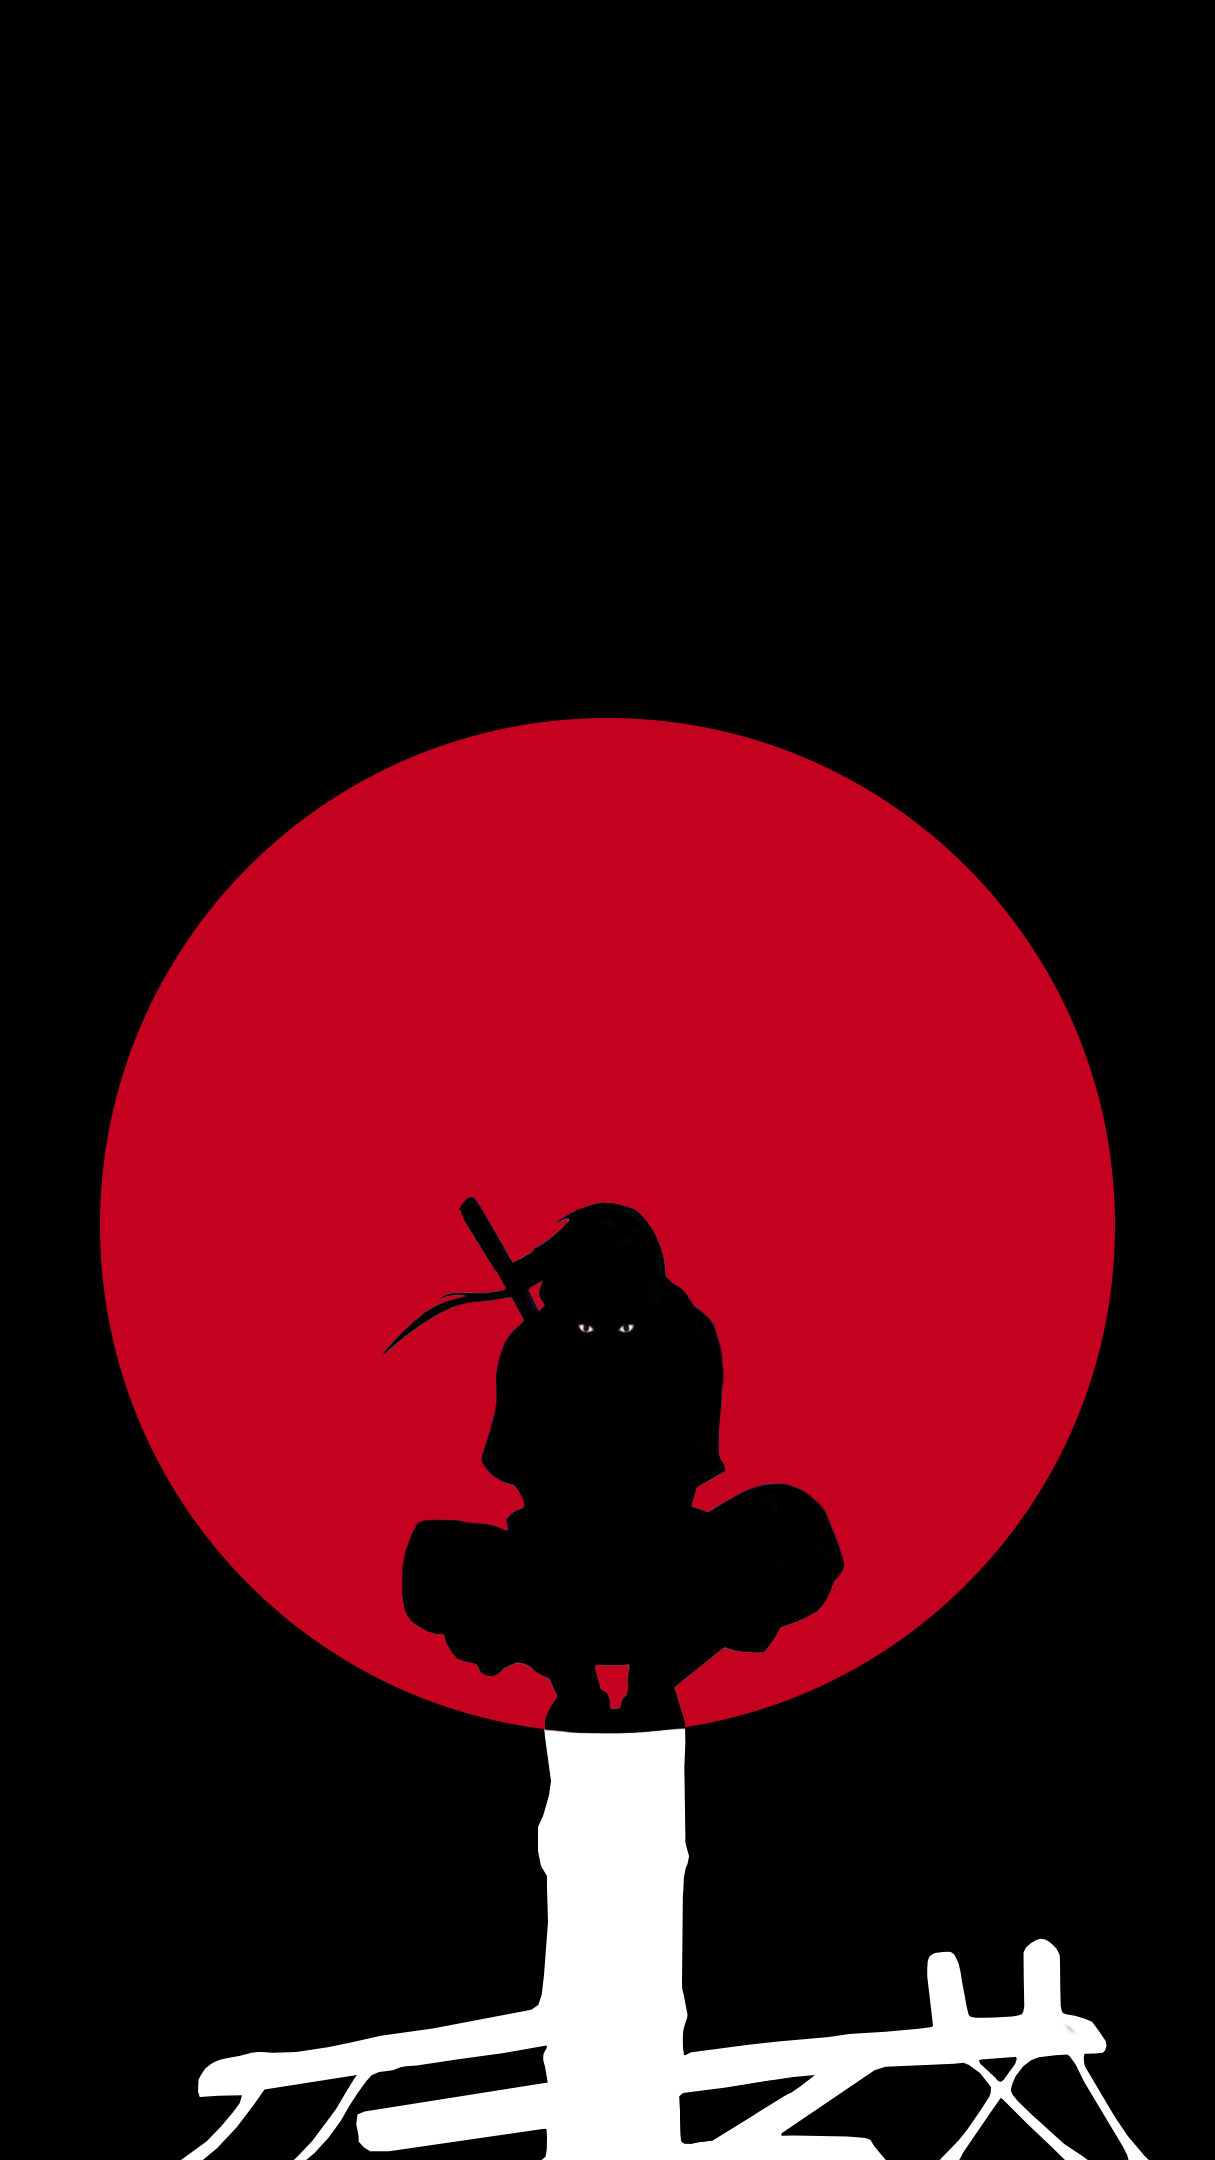 Since there were no good Itachi amoled wallpaper, I made one on my own